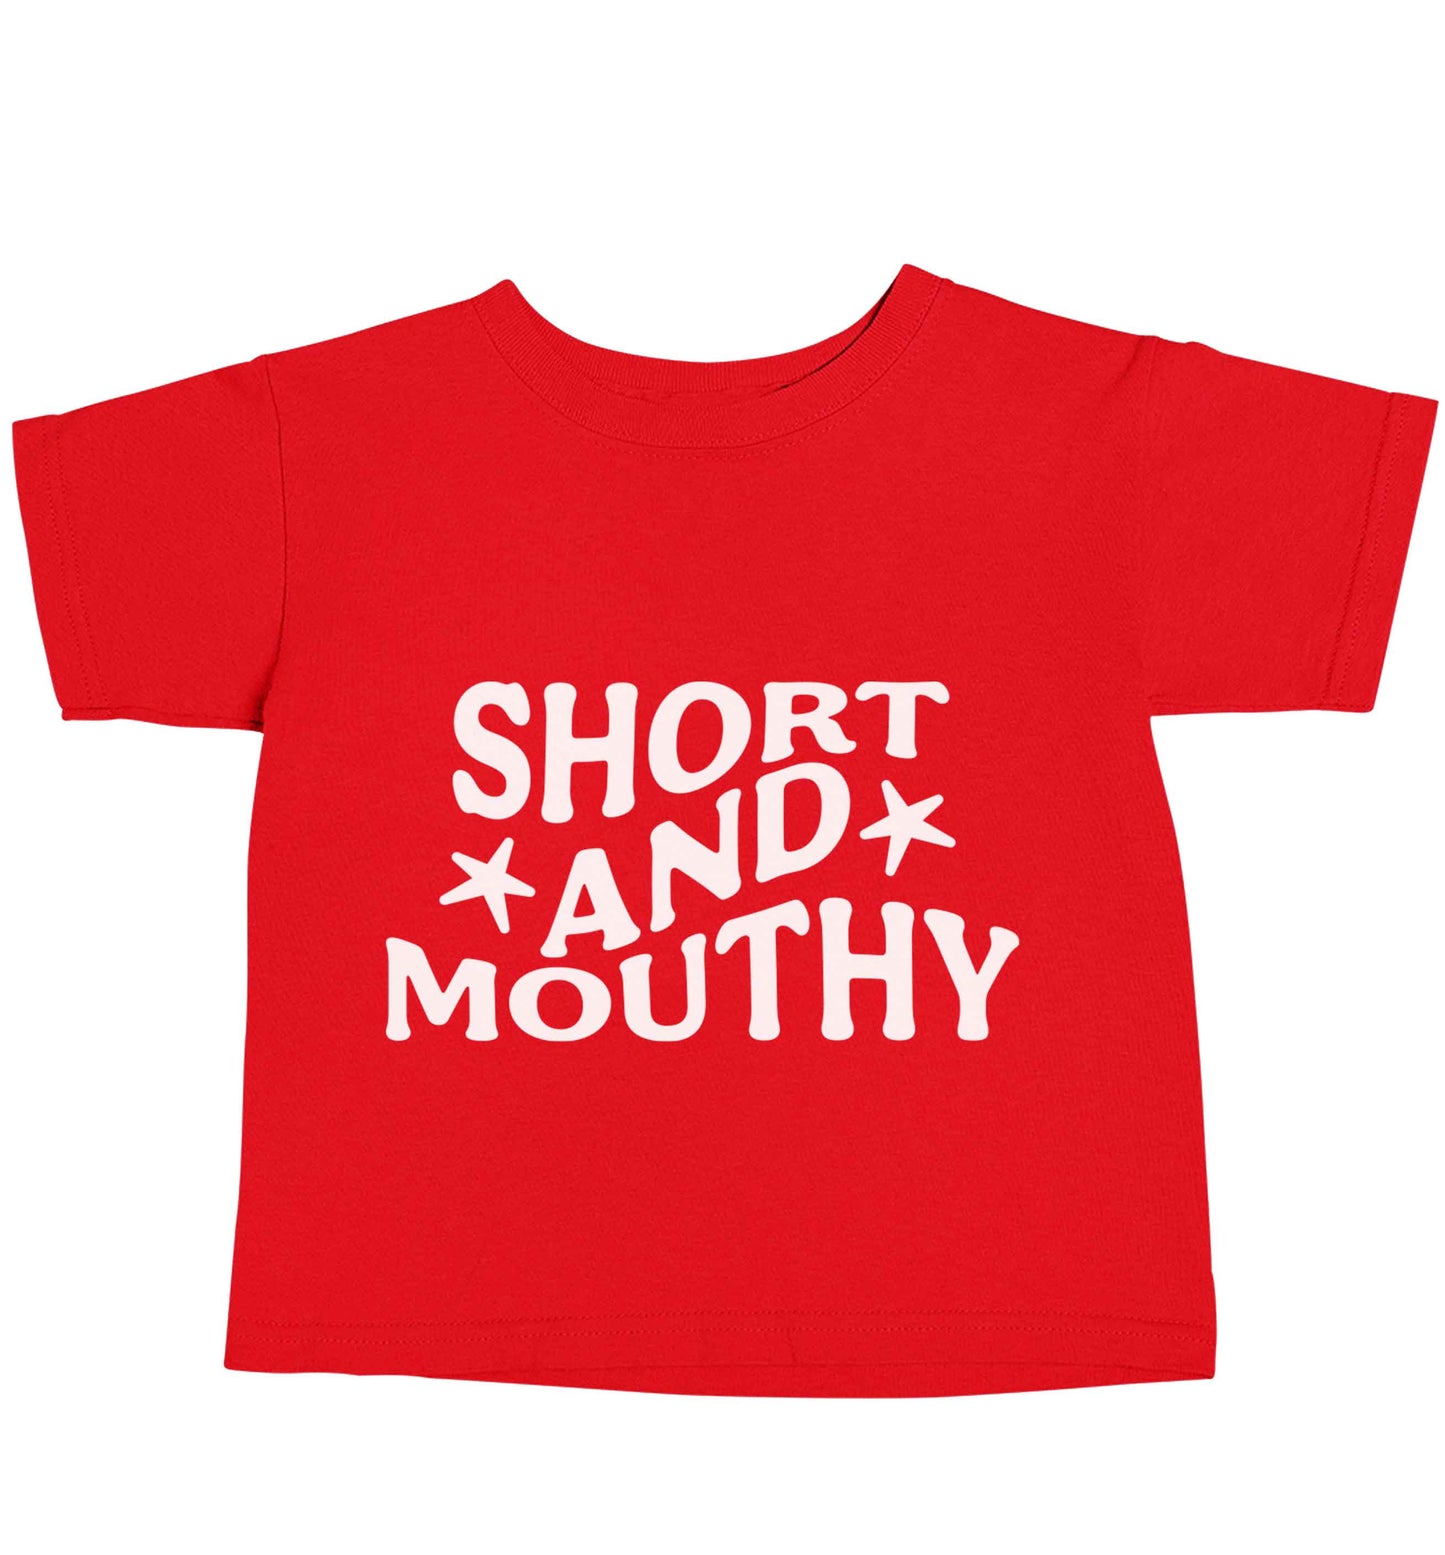 Short and mouthy red baby toddler Tshirt 2 Years